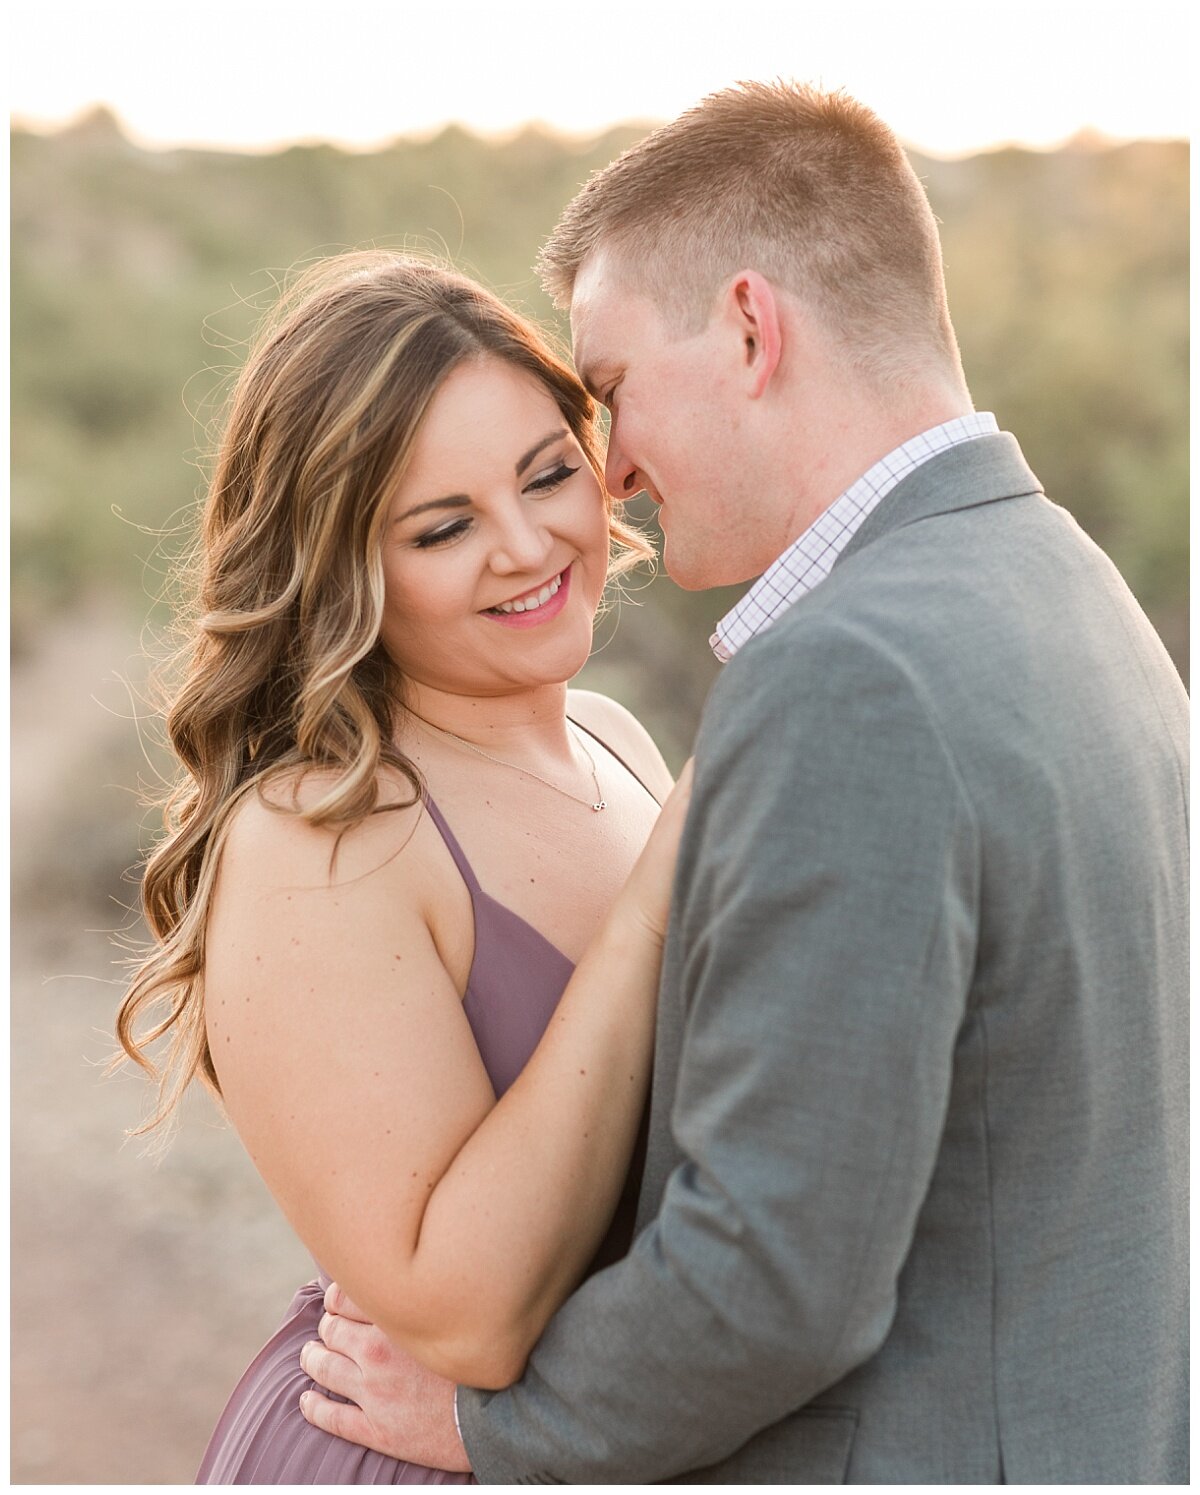 Tucson desert trail, Honey Bee Canyon, is the perfect location for your Engagement Session. Bride to be is wearing a sleeveless lilac dress at her engagement session from Lulus. Groom to be wearing a grey suit jacket from Banana Republic. Photos tak…